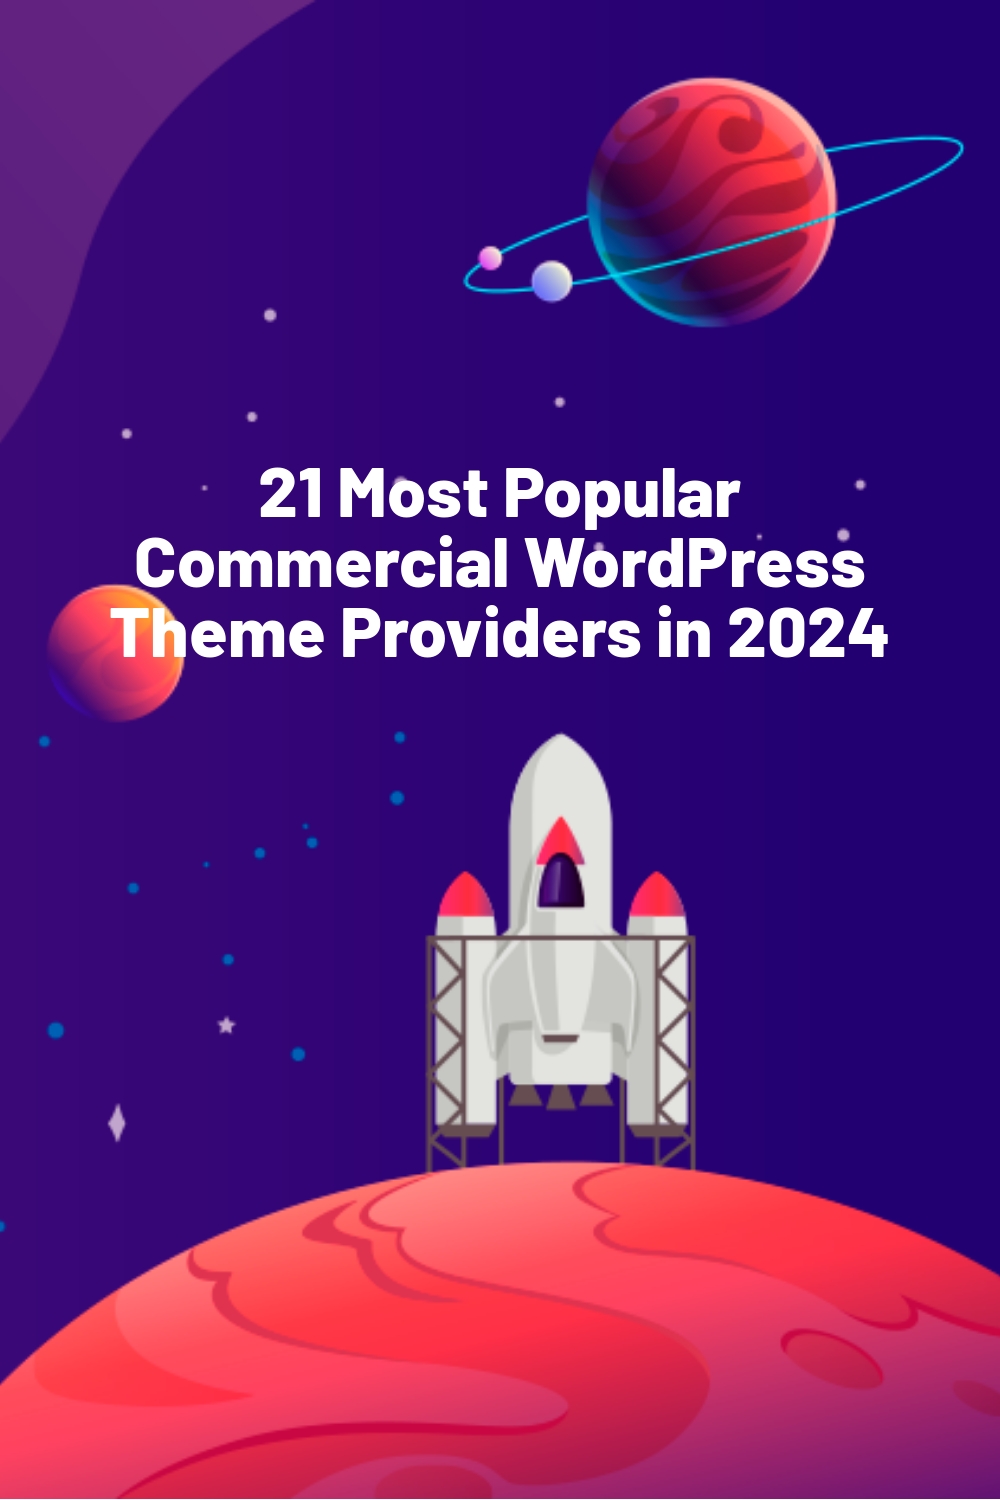 21 Most Popular Commercial WordPress Theme Providers in 2024